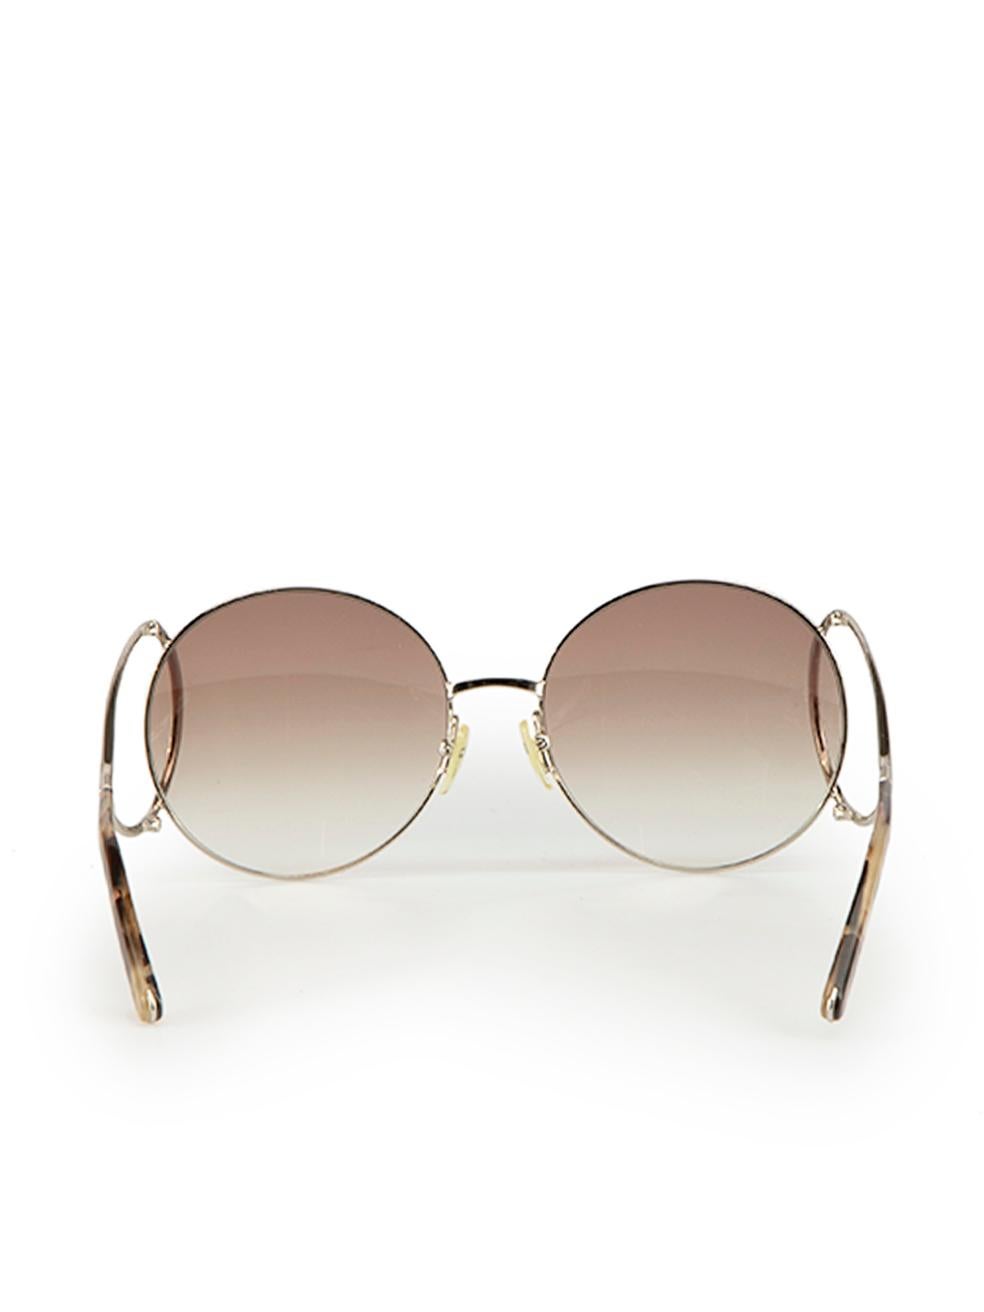 Chloé Brown Tinted Round Sunglasses In Excellent Condition For Sale In London, GB